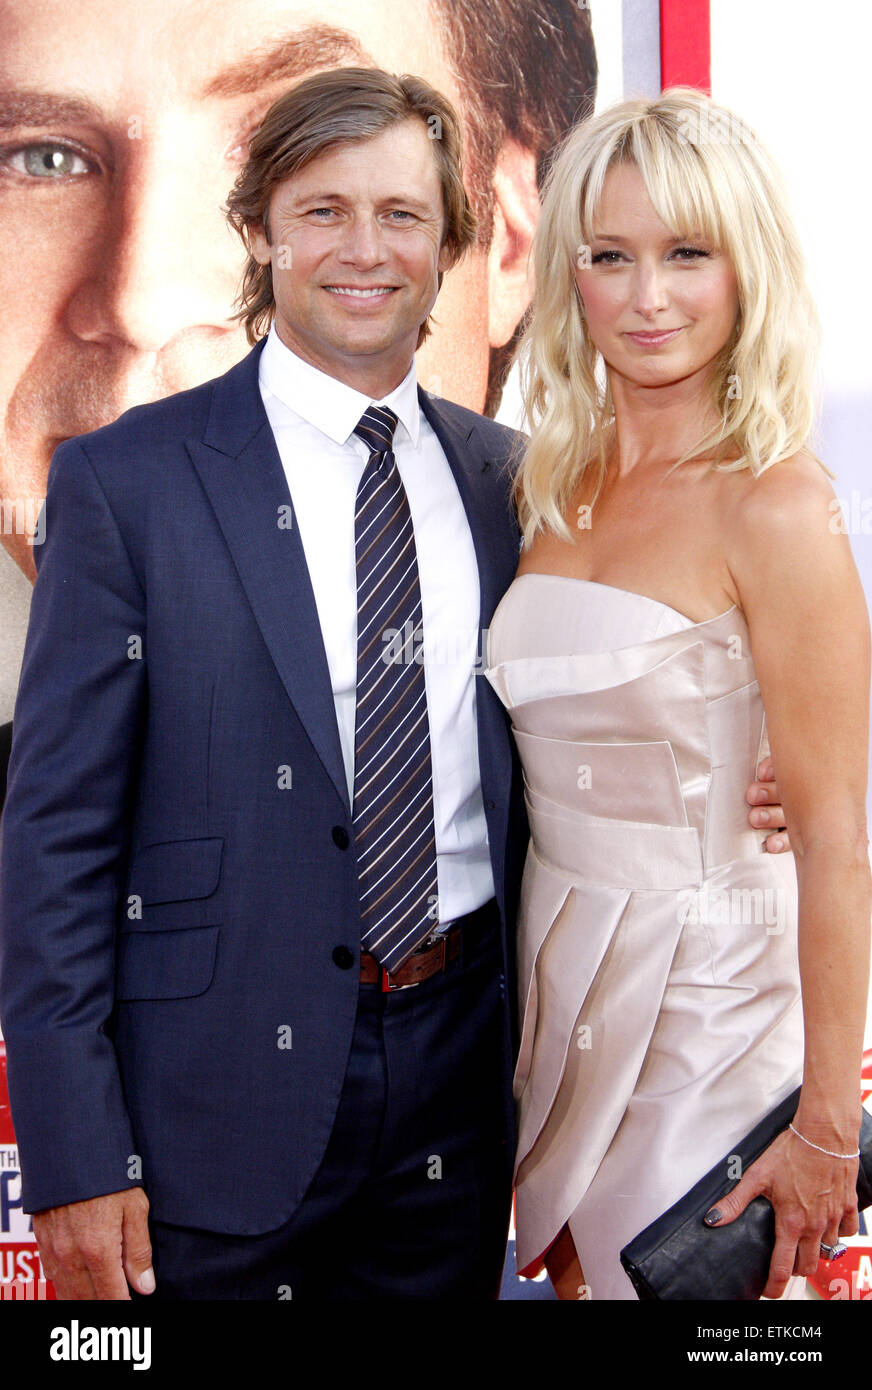 Grant Show and Katherine LaNasa at the Los Angeles premiere of 'Campaign' held at the Grauman's Chinese Theater in Hollywood. Stock Photo